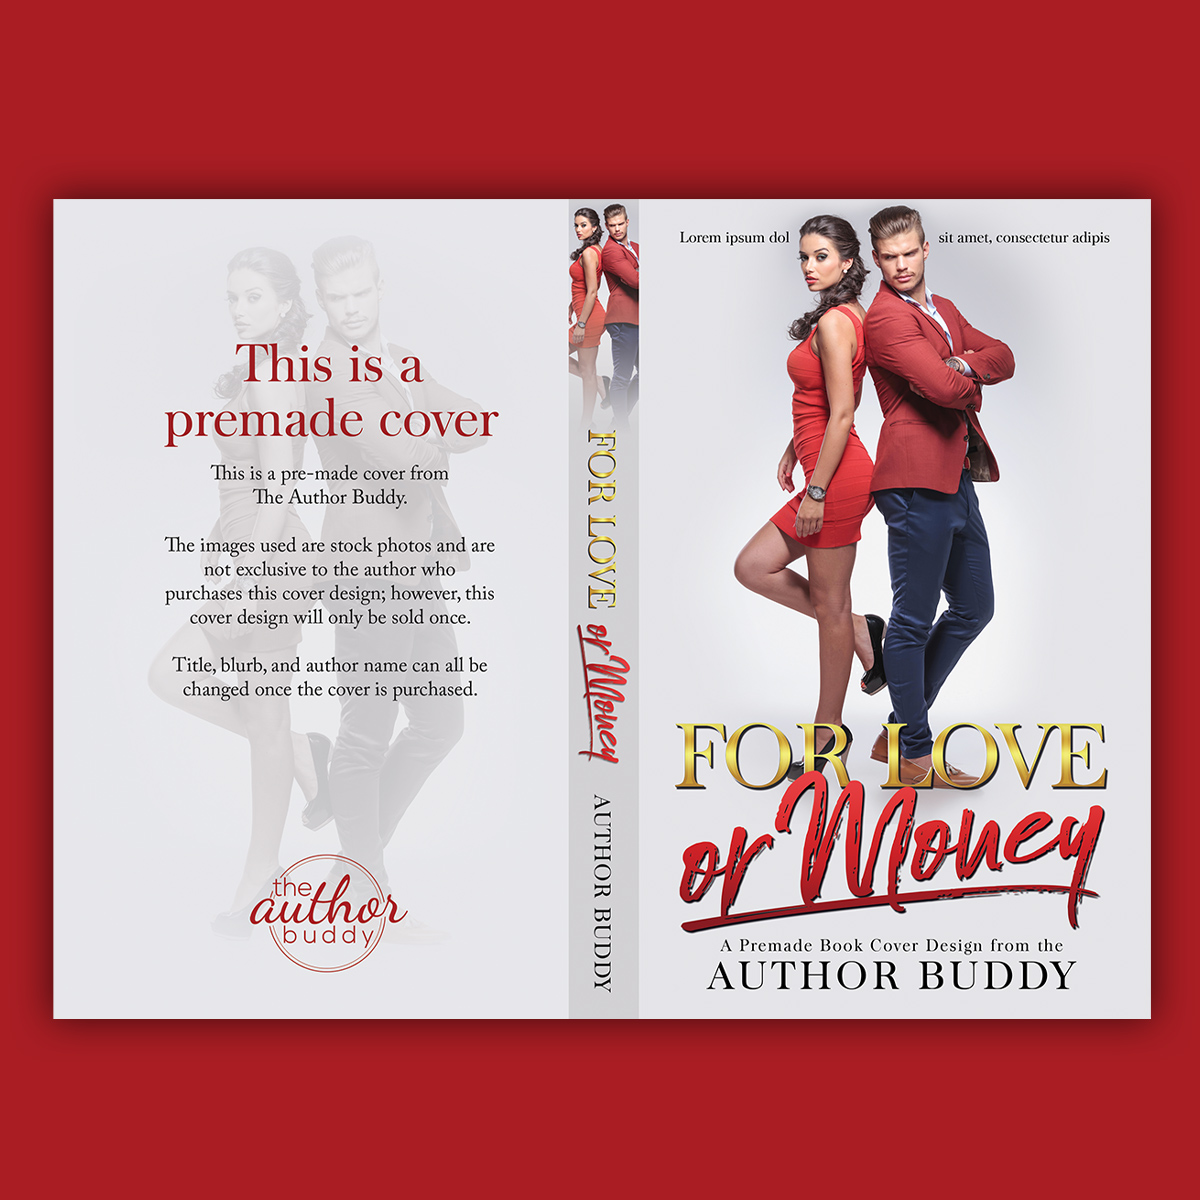 For Love or Money - Premade Contemporary Romance / Romantic Comedy Book Cover from The Author Buddy